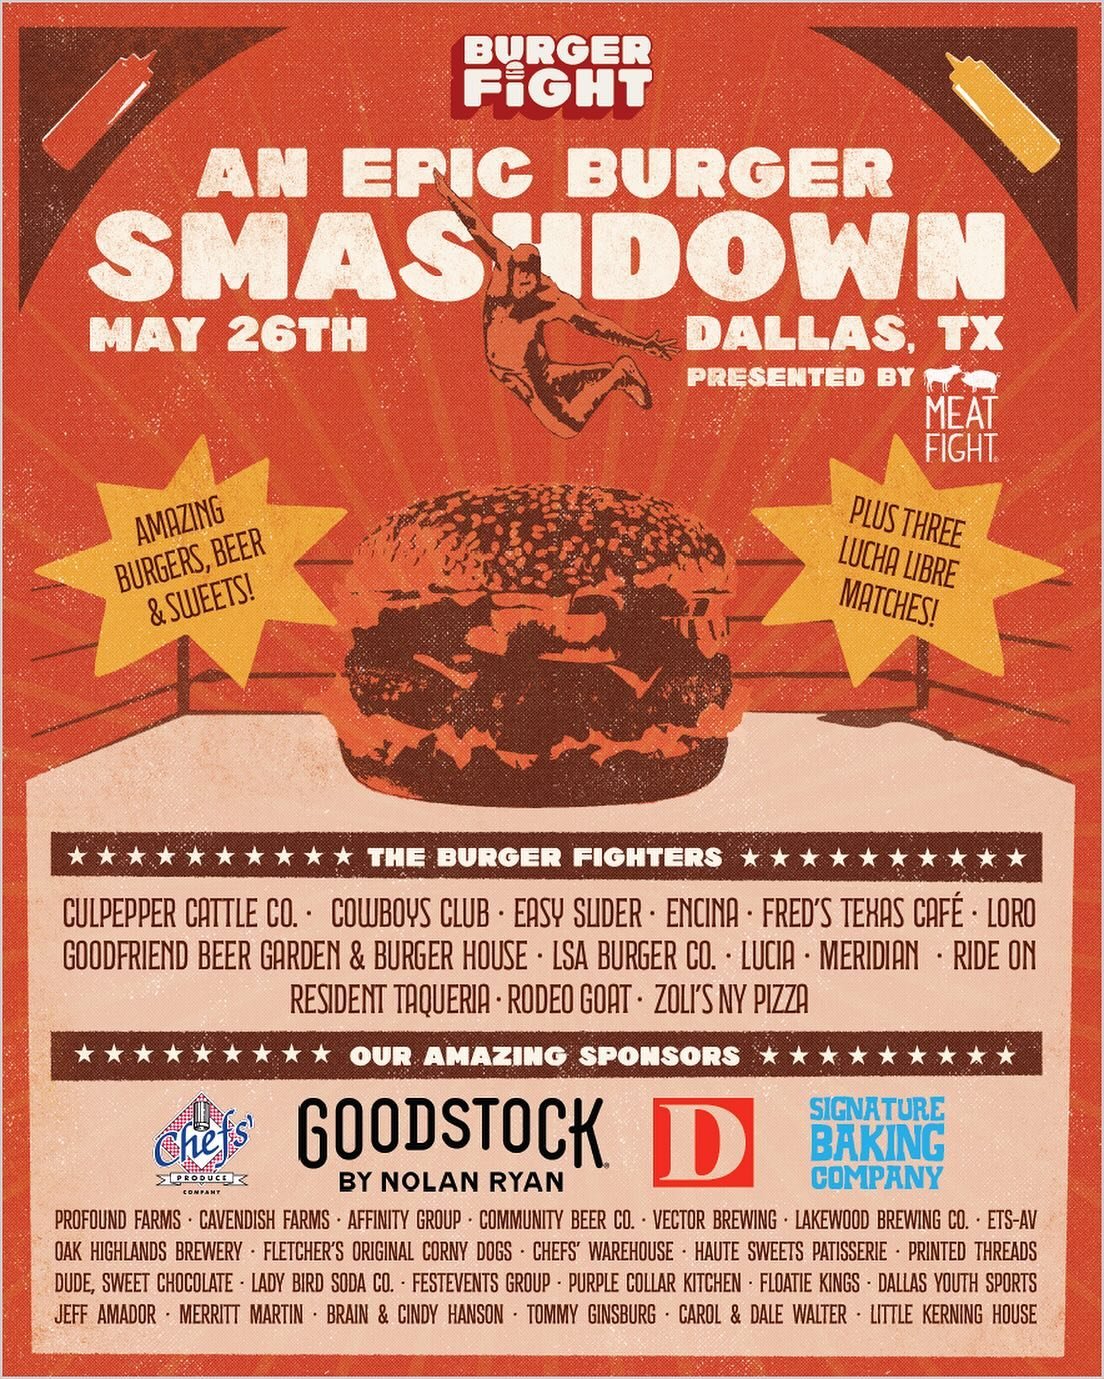 Burgers, beers, AND wrestling? Count us in!🍔🍻💪

We&rsquo;re proud to be partnering with @meat_fight for the most epic, bada$$ throw down in town. On Sunday, May 26, yours truly will be serving up beers at 𝗕𝗨𝗥𝗚𝗘𝗥 𝗙𝗜𝗚𝗛𝗧 𝟮𝟬𝟮𝟰! Enjoy ki